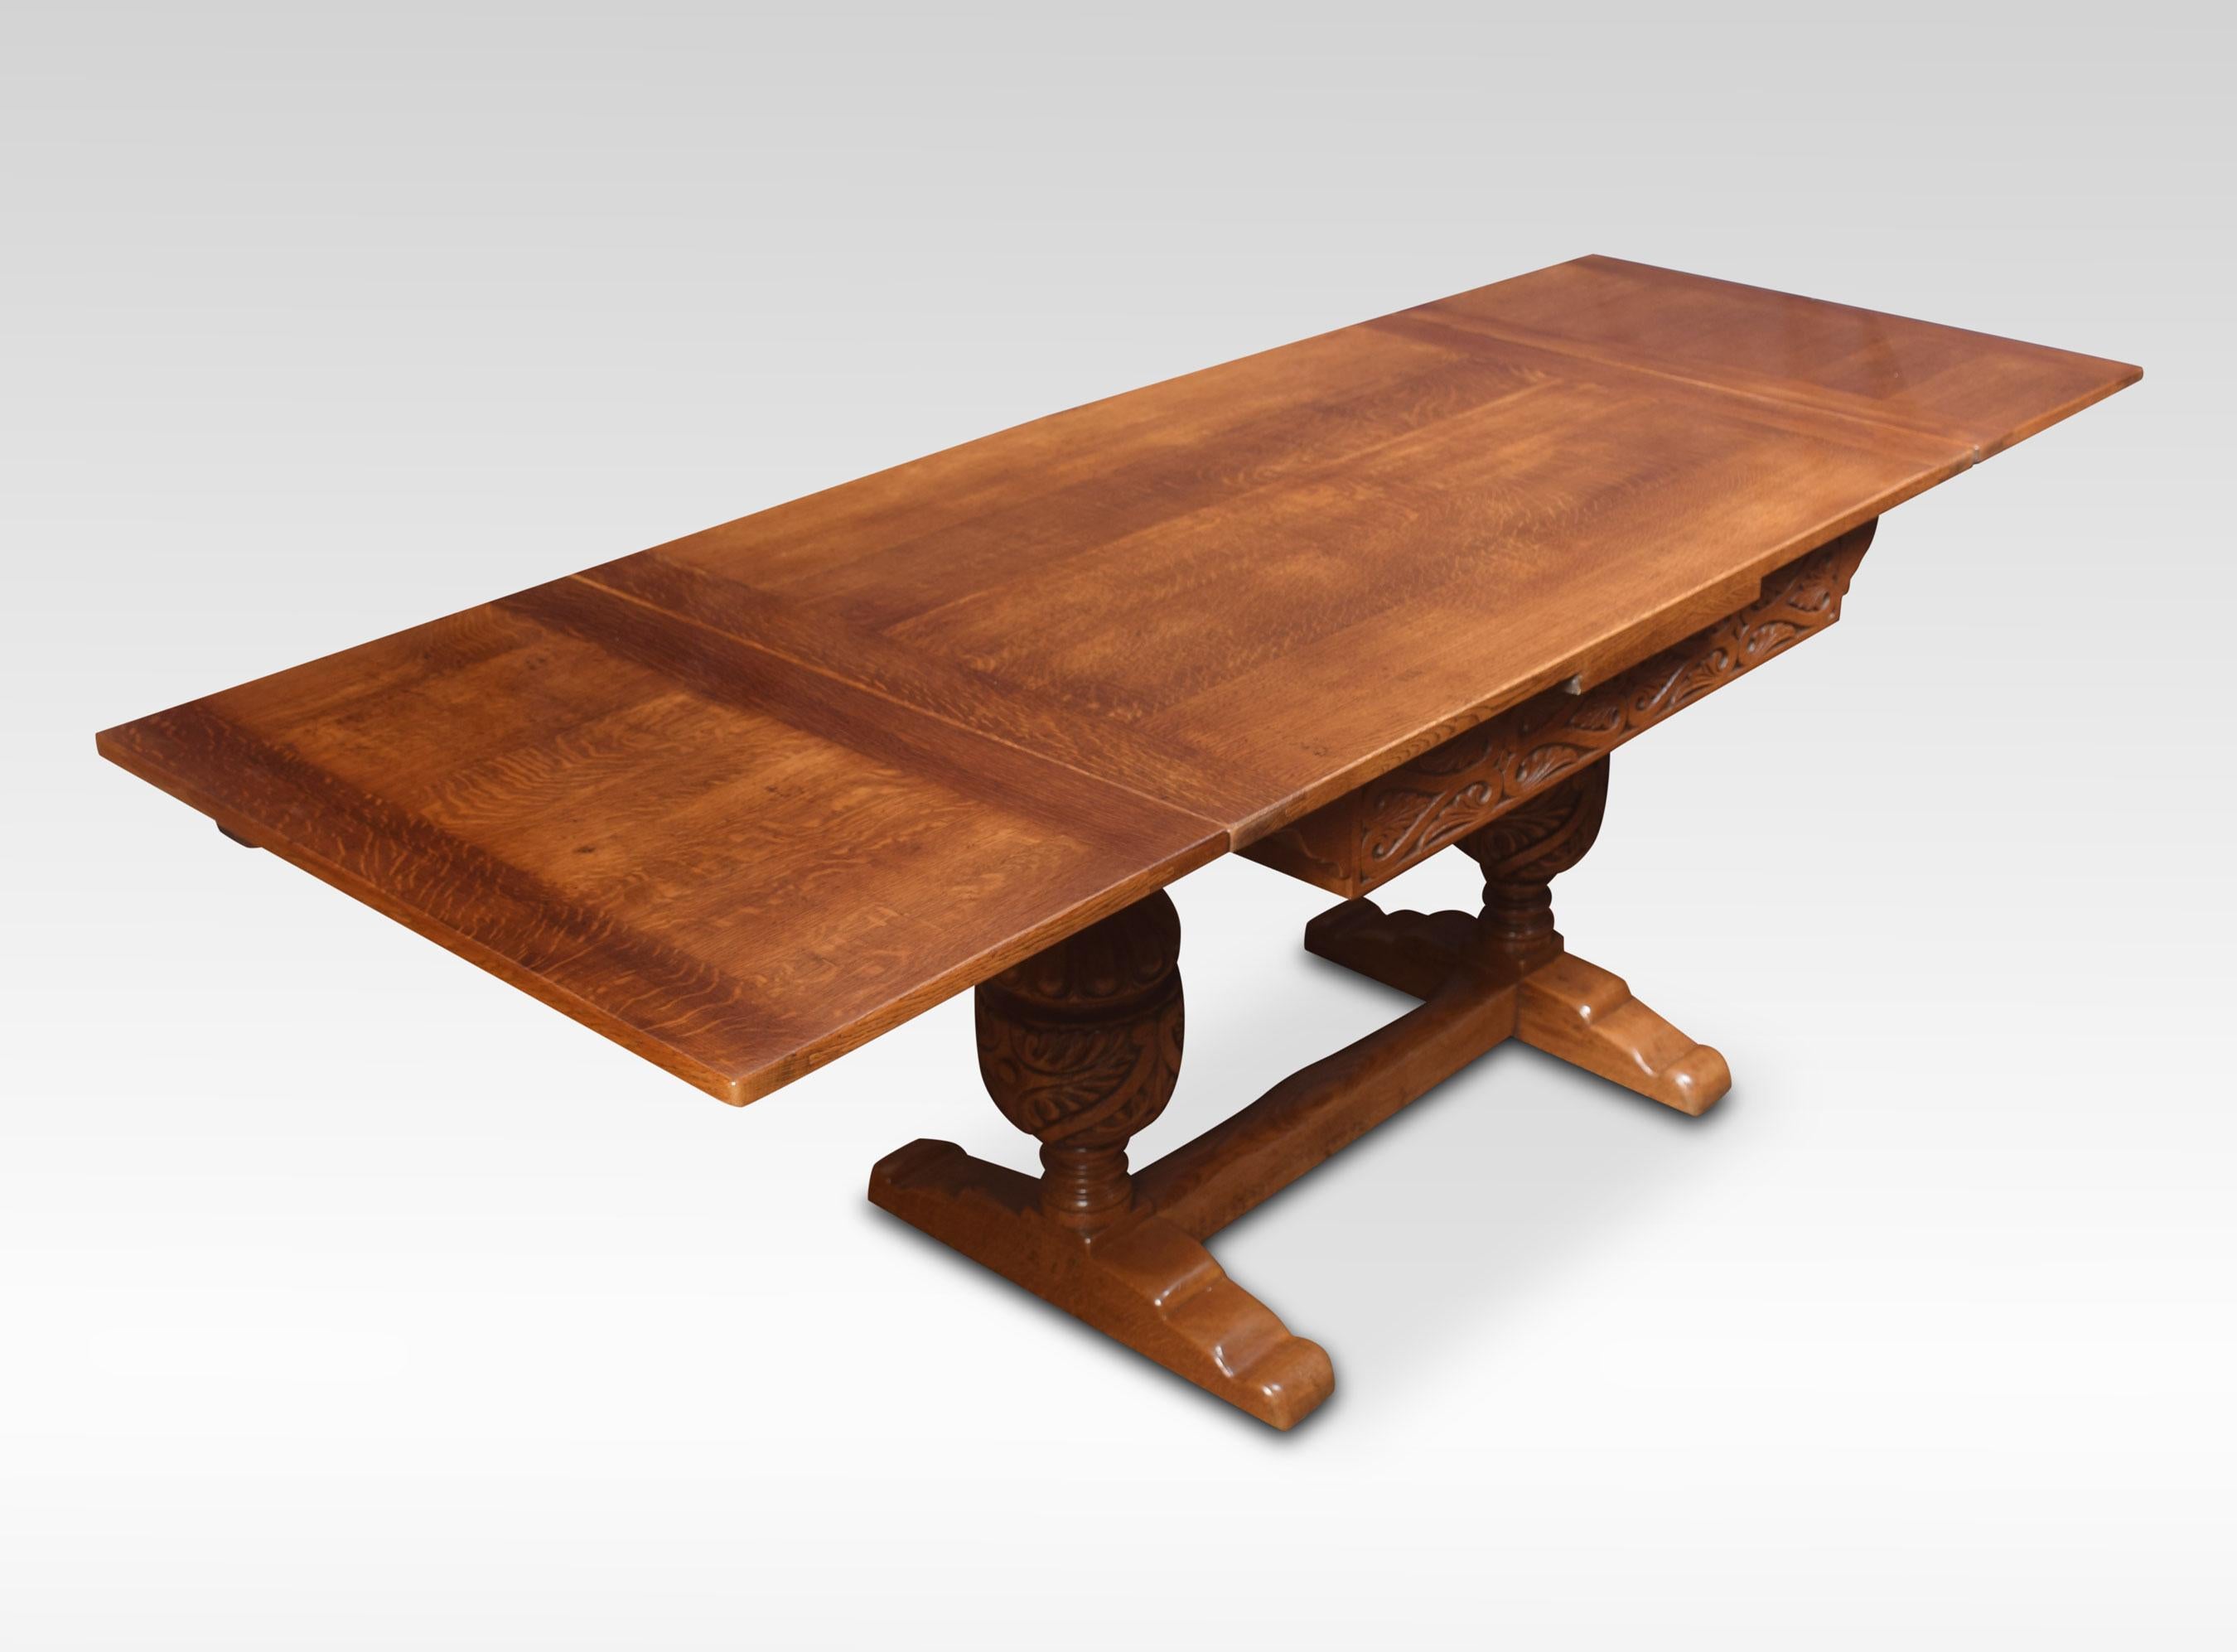 Oak draw leaf refectory table, the rectangular solid oak top having pull out ends. Above carved bulbous cup and cover supports united by a stretcher.
Dimensions
Height 30 inches
Width 48 inches when open 84 inches
Depth 31.5 inches.